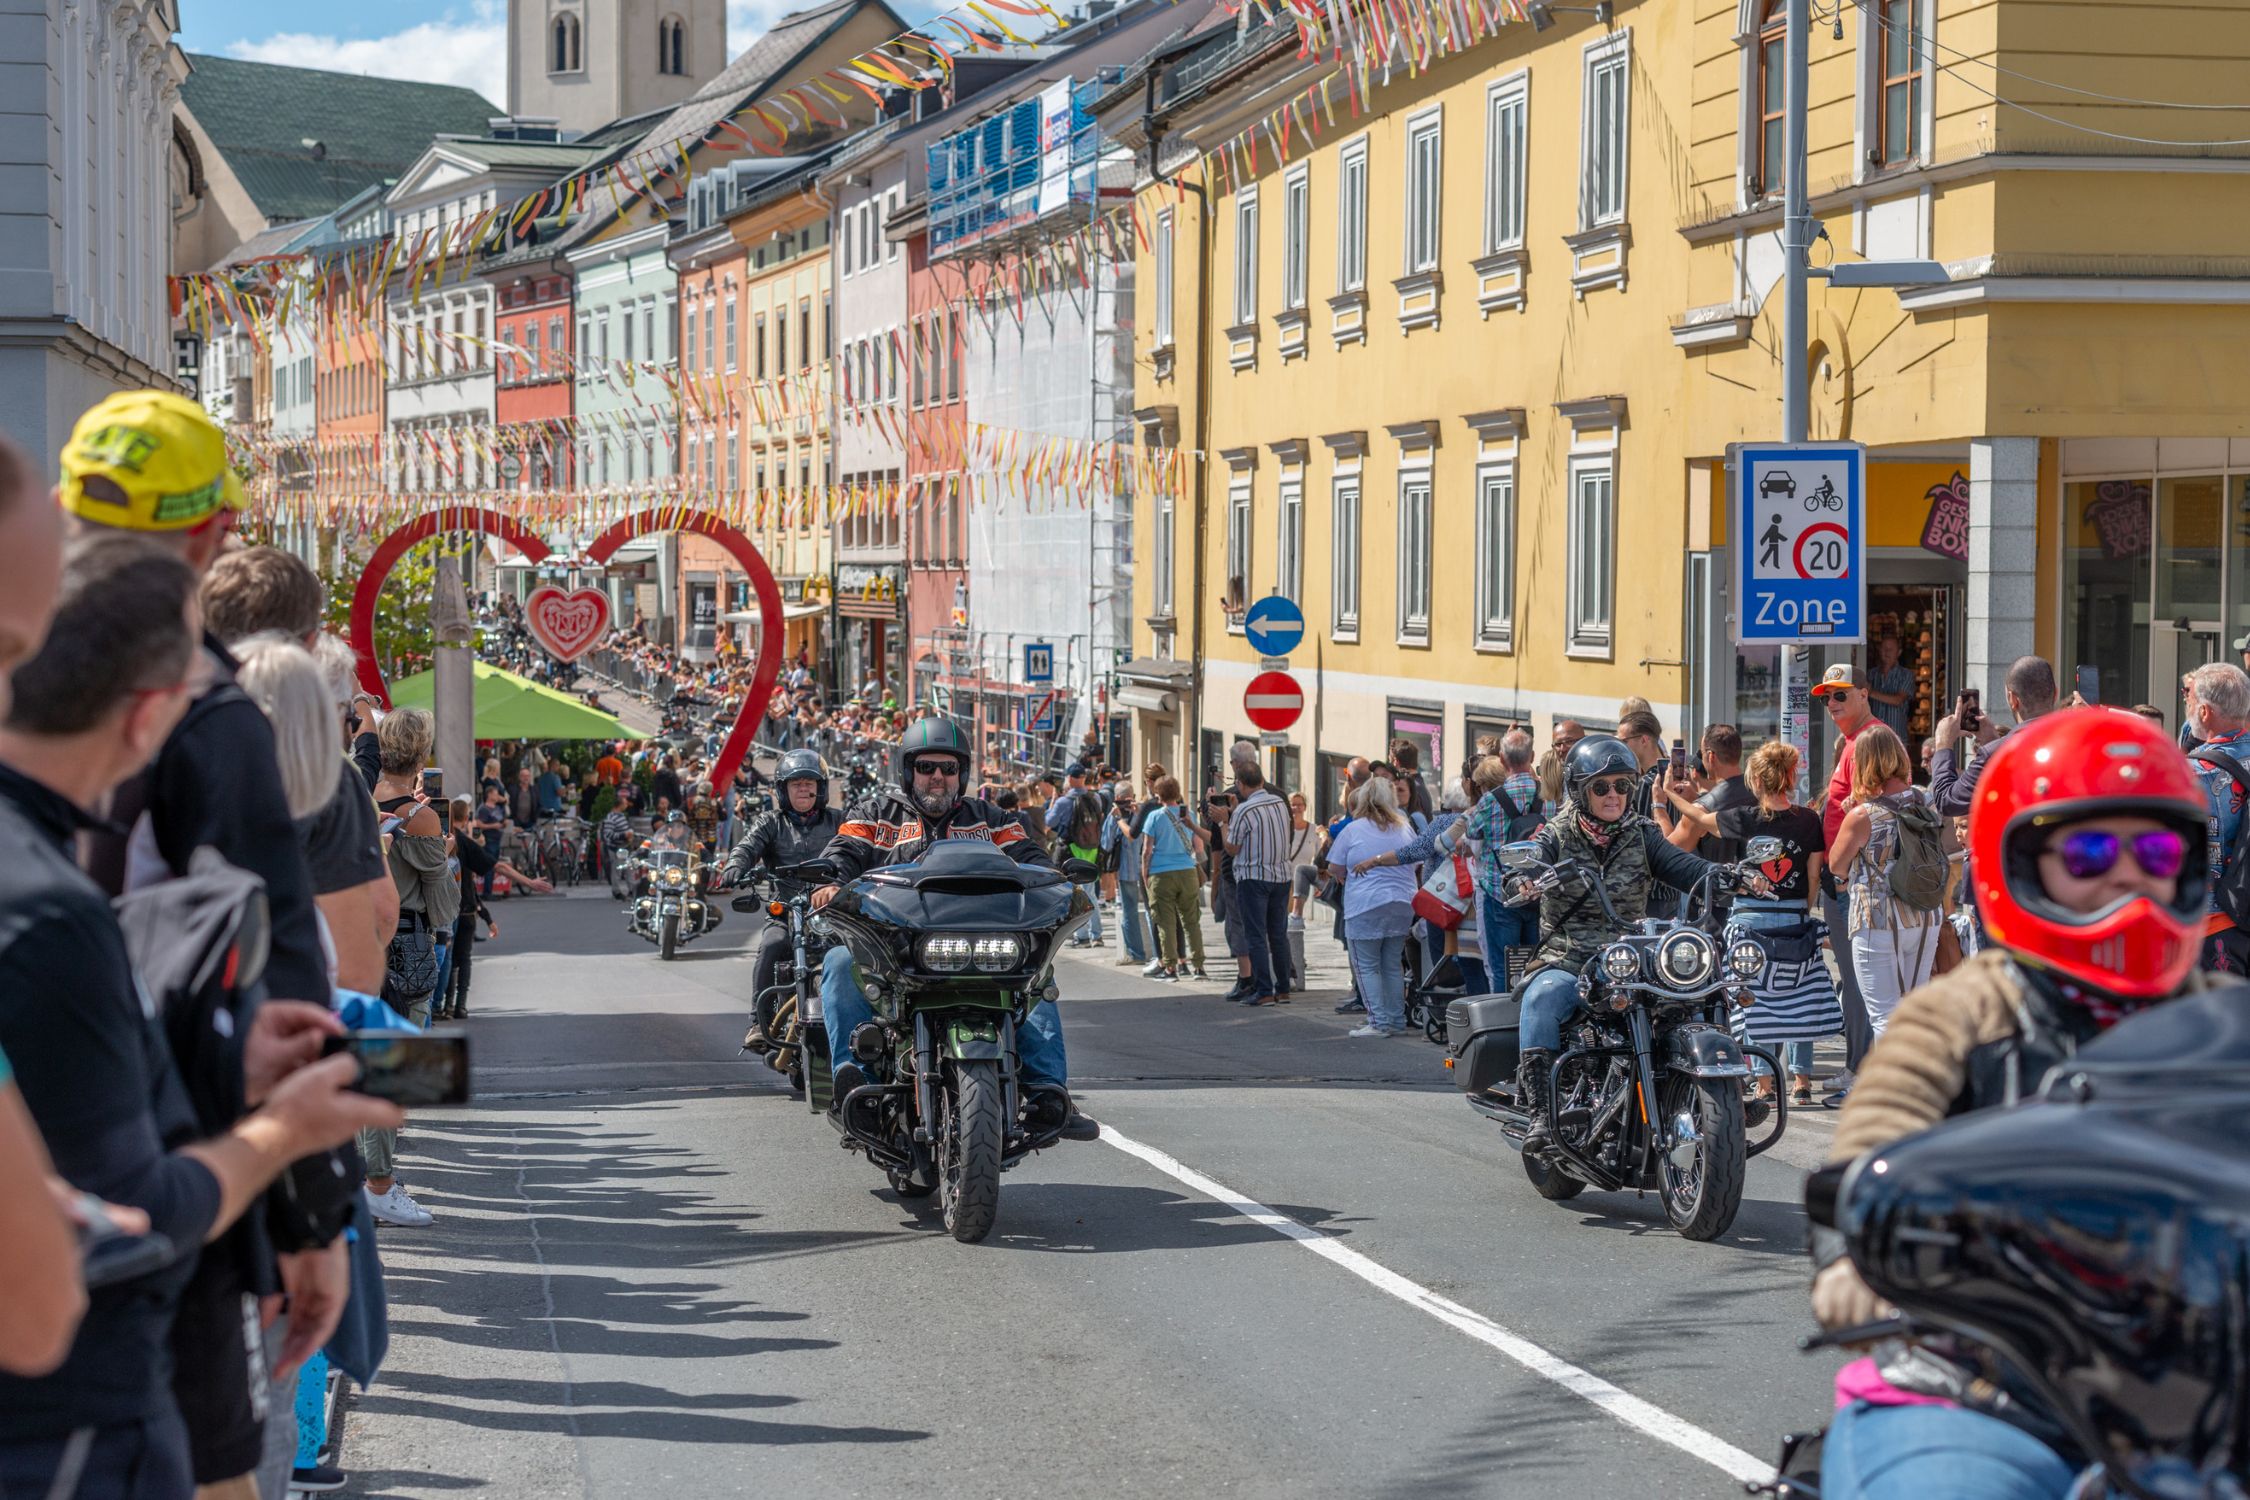 Harley fans gather to watch the parade in the city center of Villach